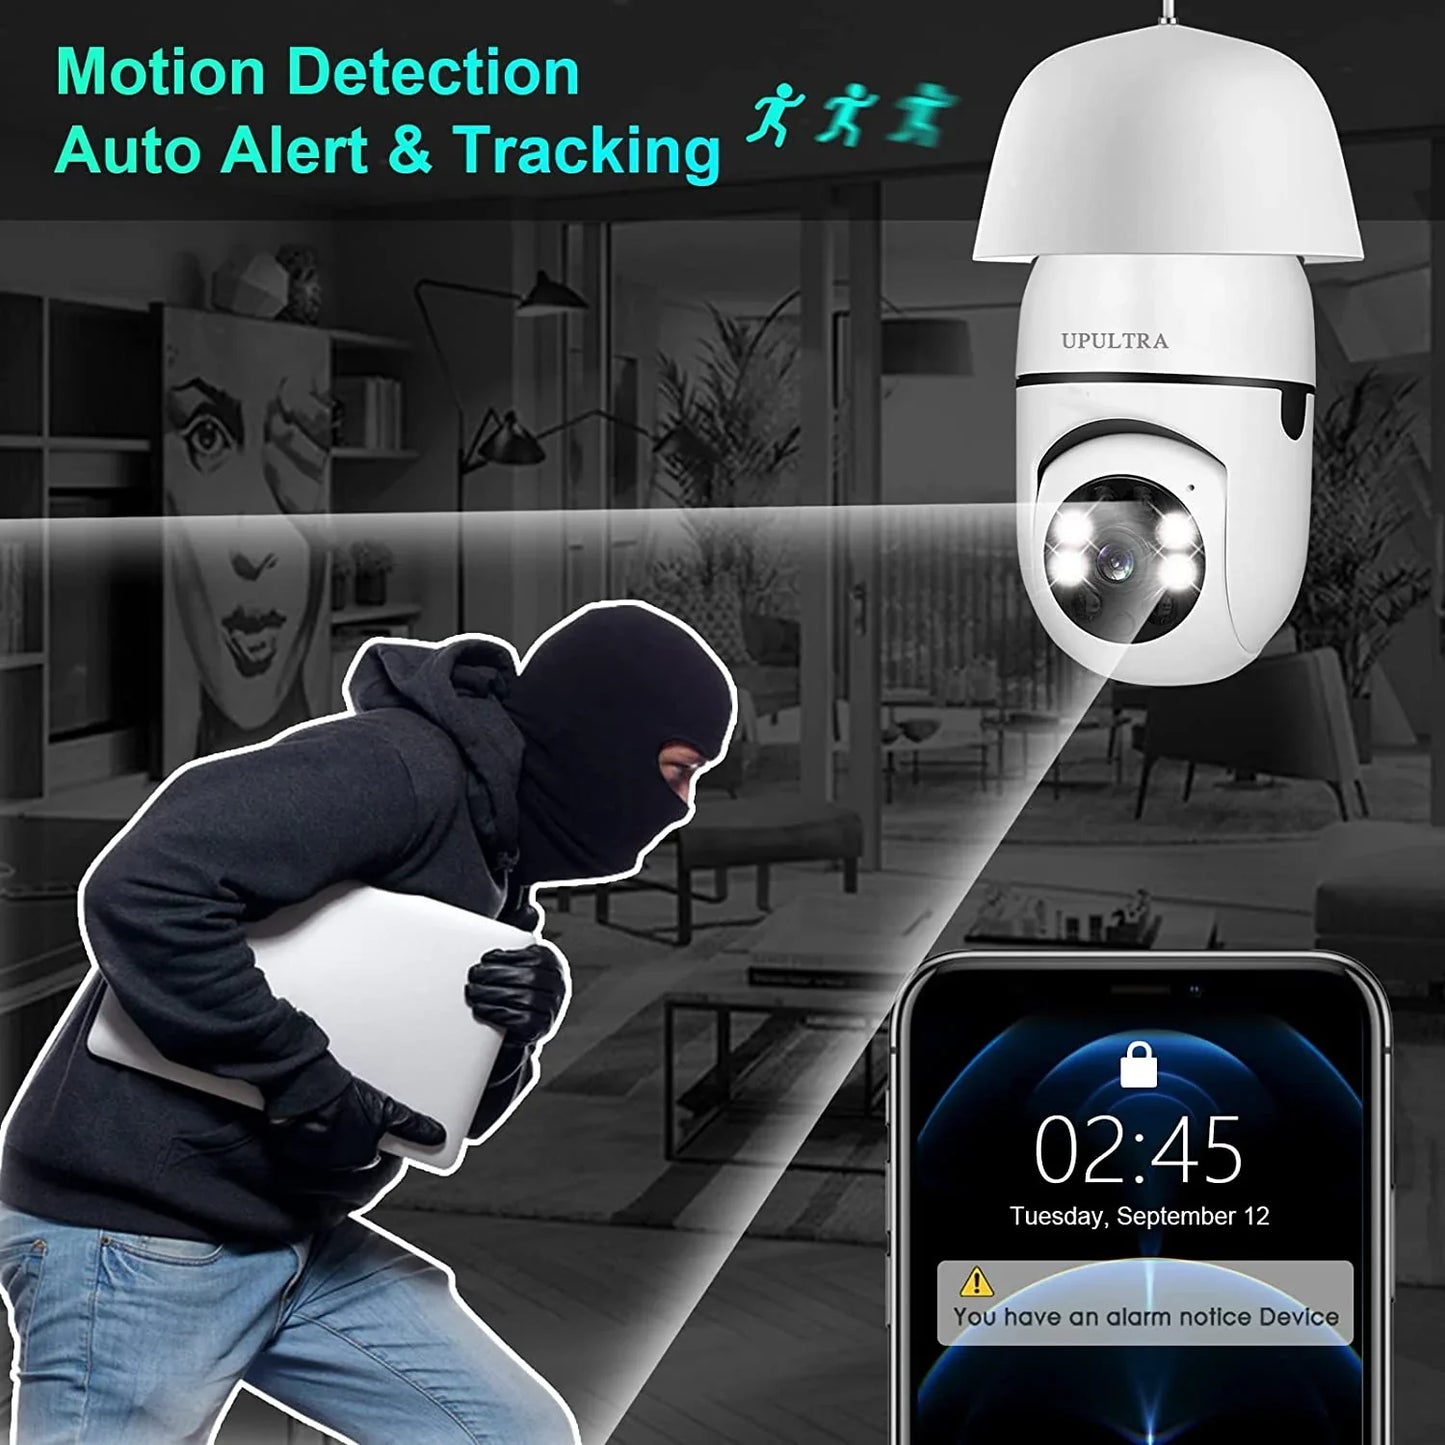 V380 PRO CCTV -HD CAMERA WITH MOTION DETECTION, COLORED NIGHT VISION